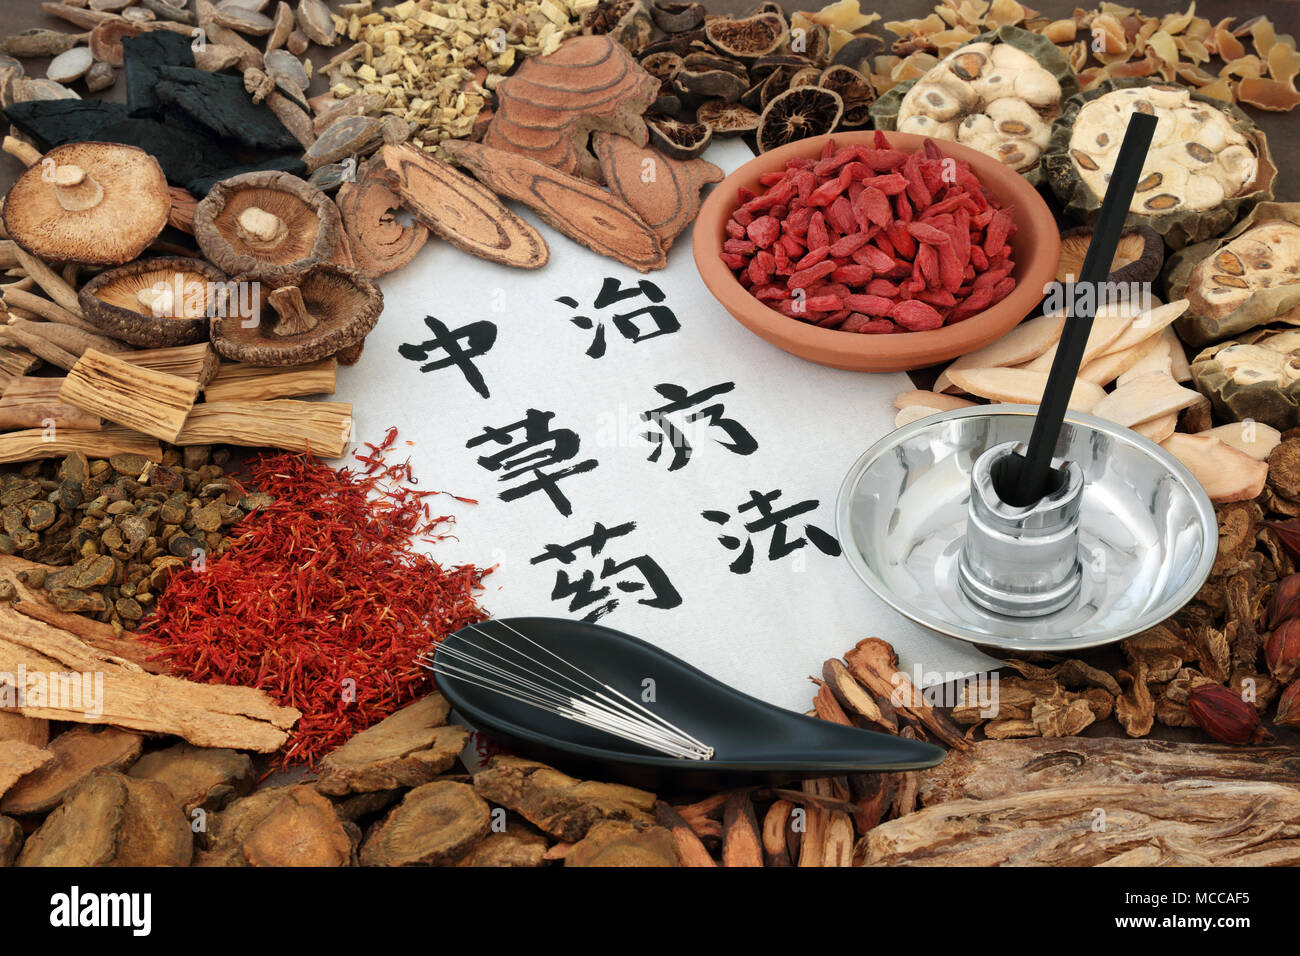 Chinese acupuncture needles and moxa sticks used in moxibustion therapy with herbs used in herbal medicine and calligraphy script on rice paper. Trans Stock Photo